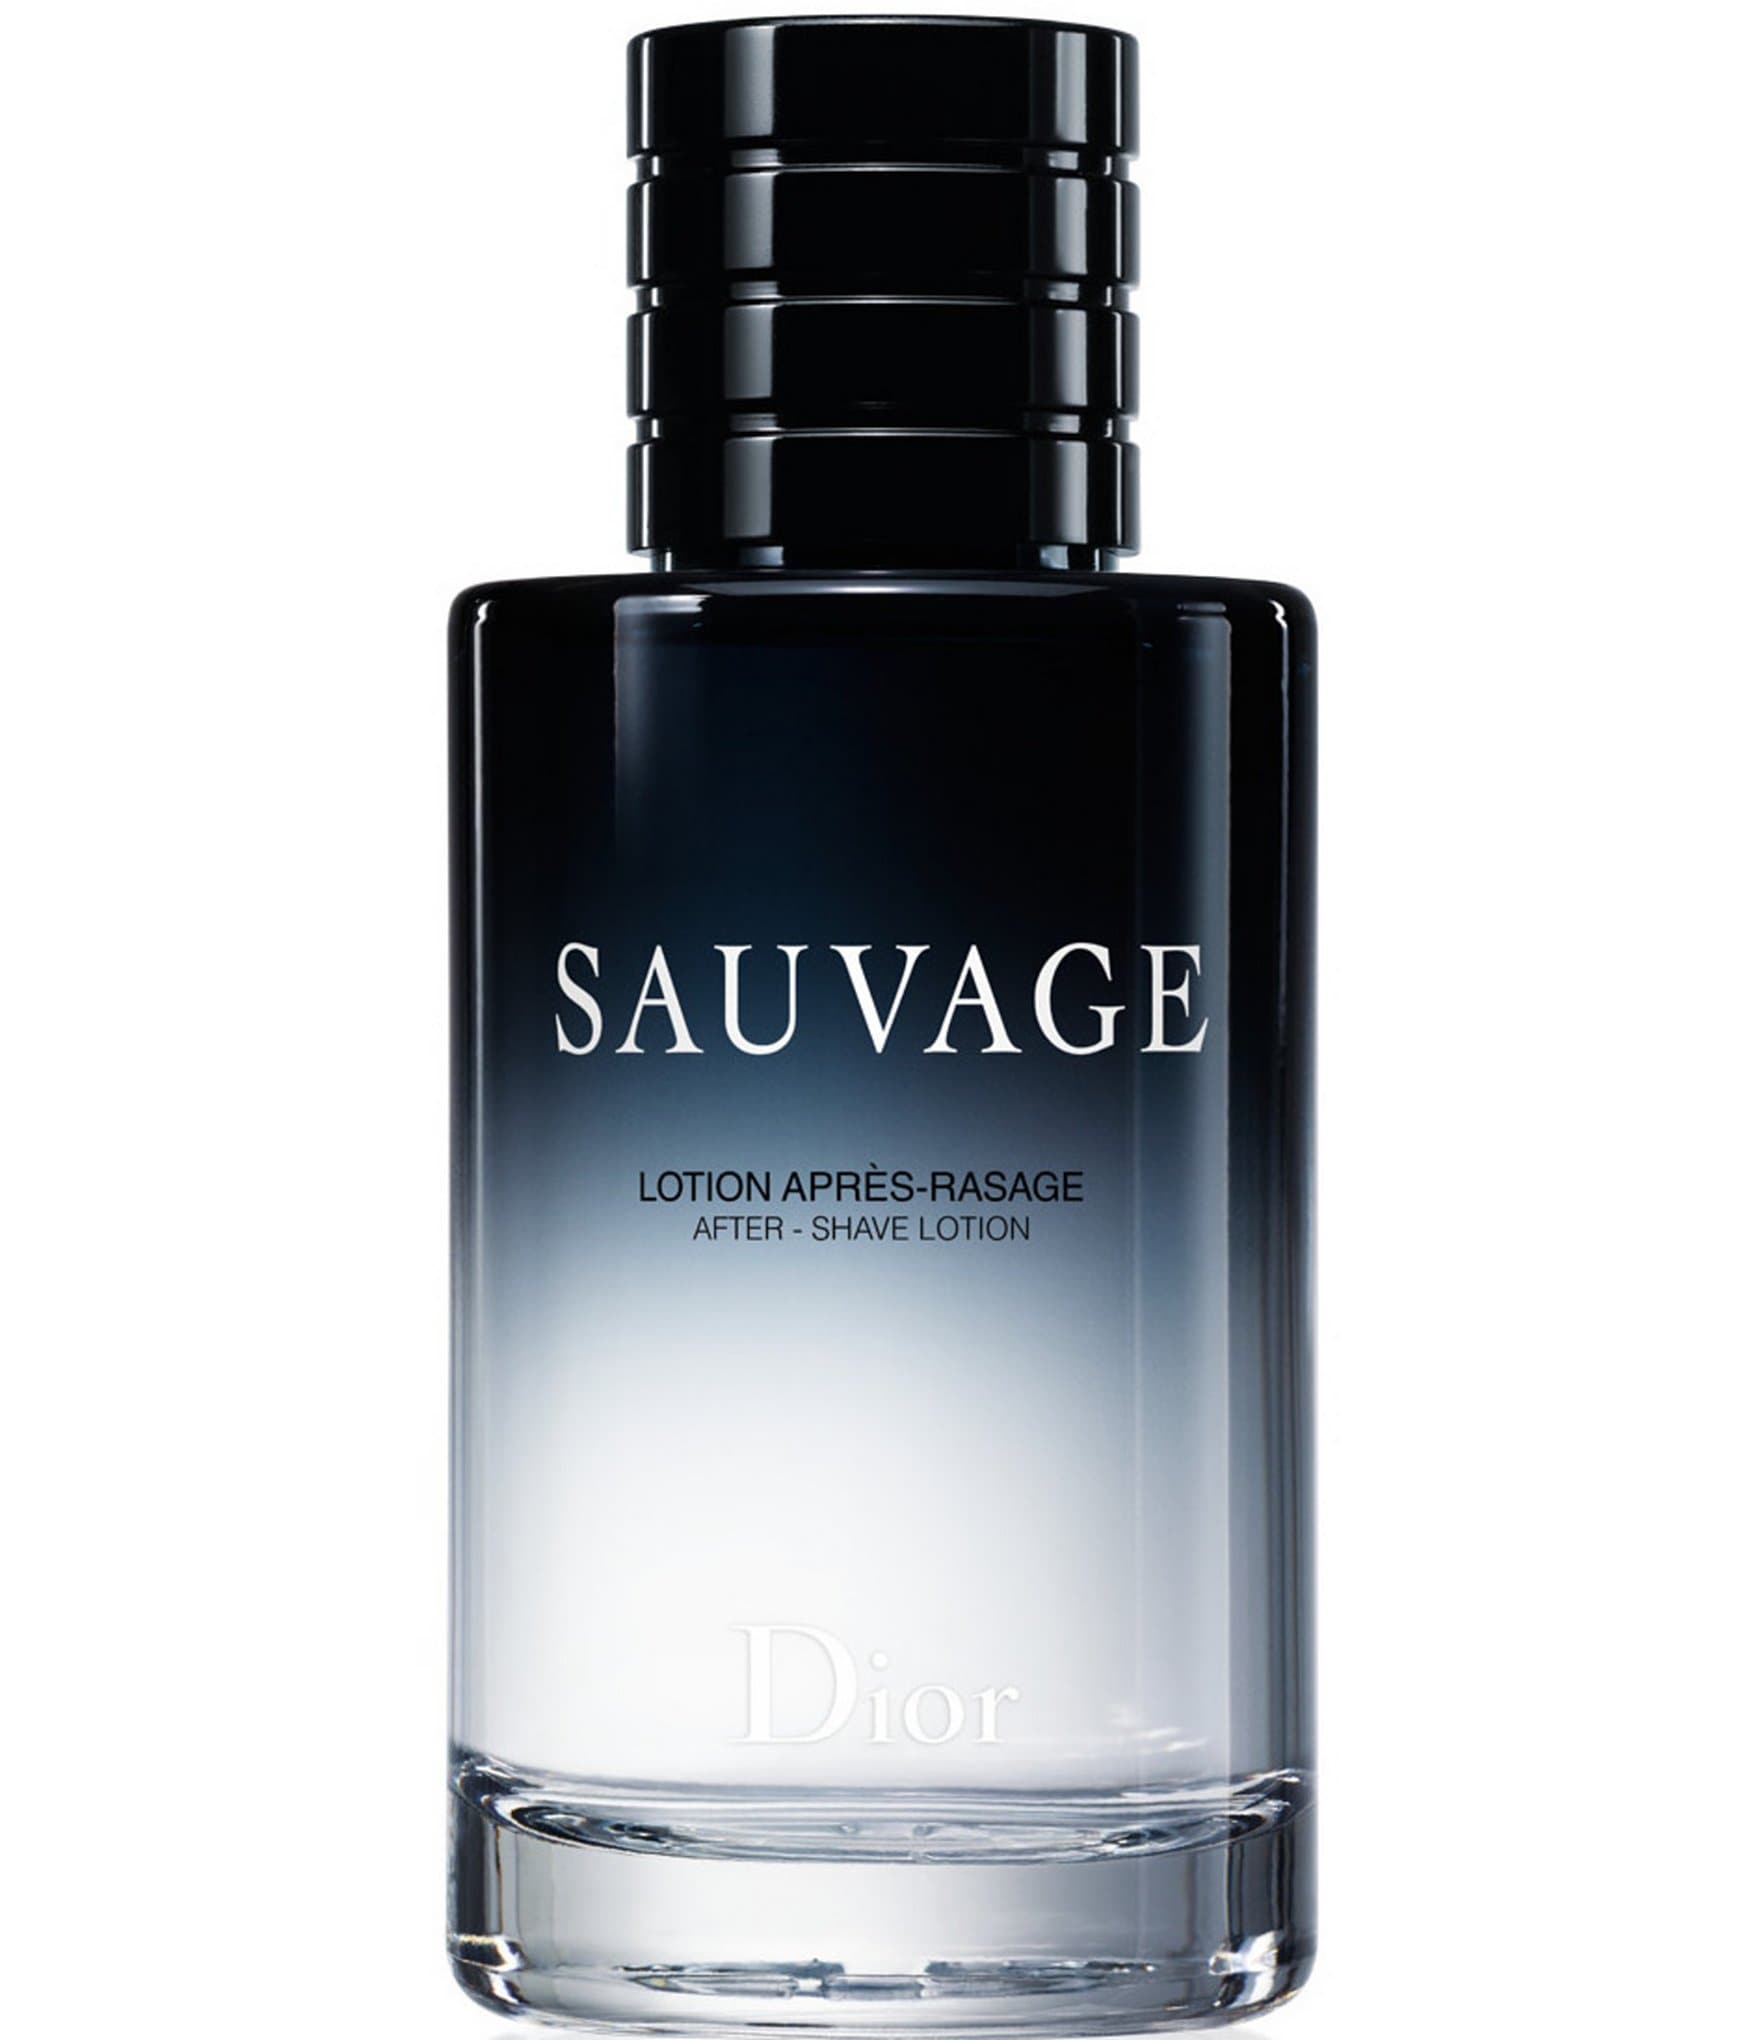 Dior Sauvage: The anatomy of a Blockbuster Fragrance